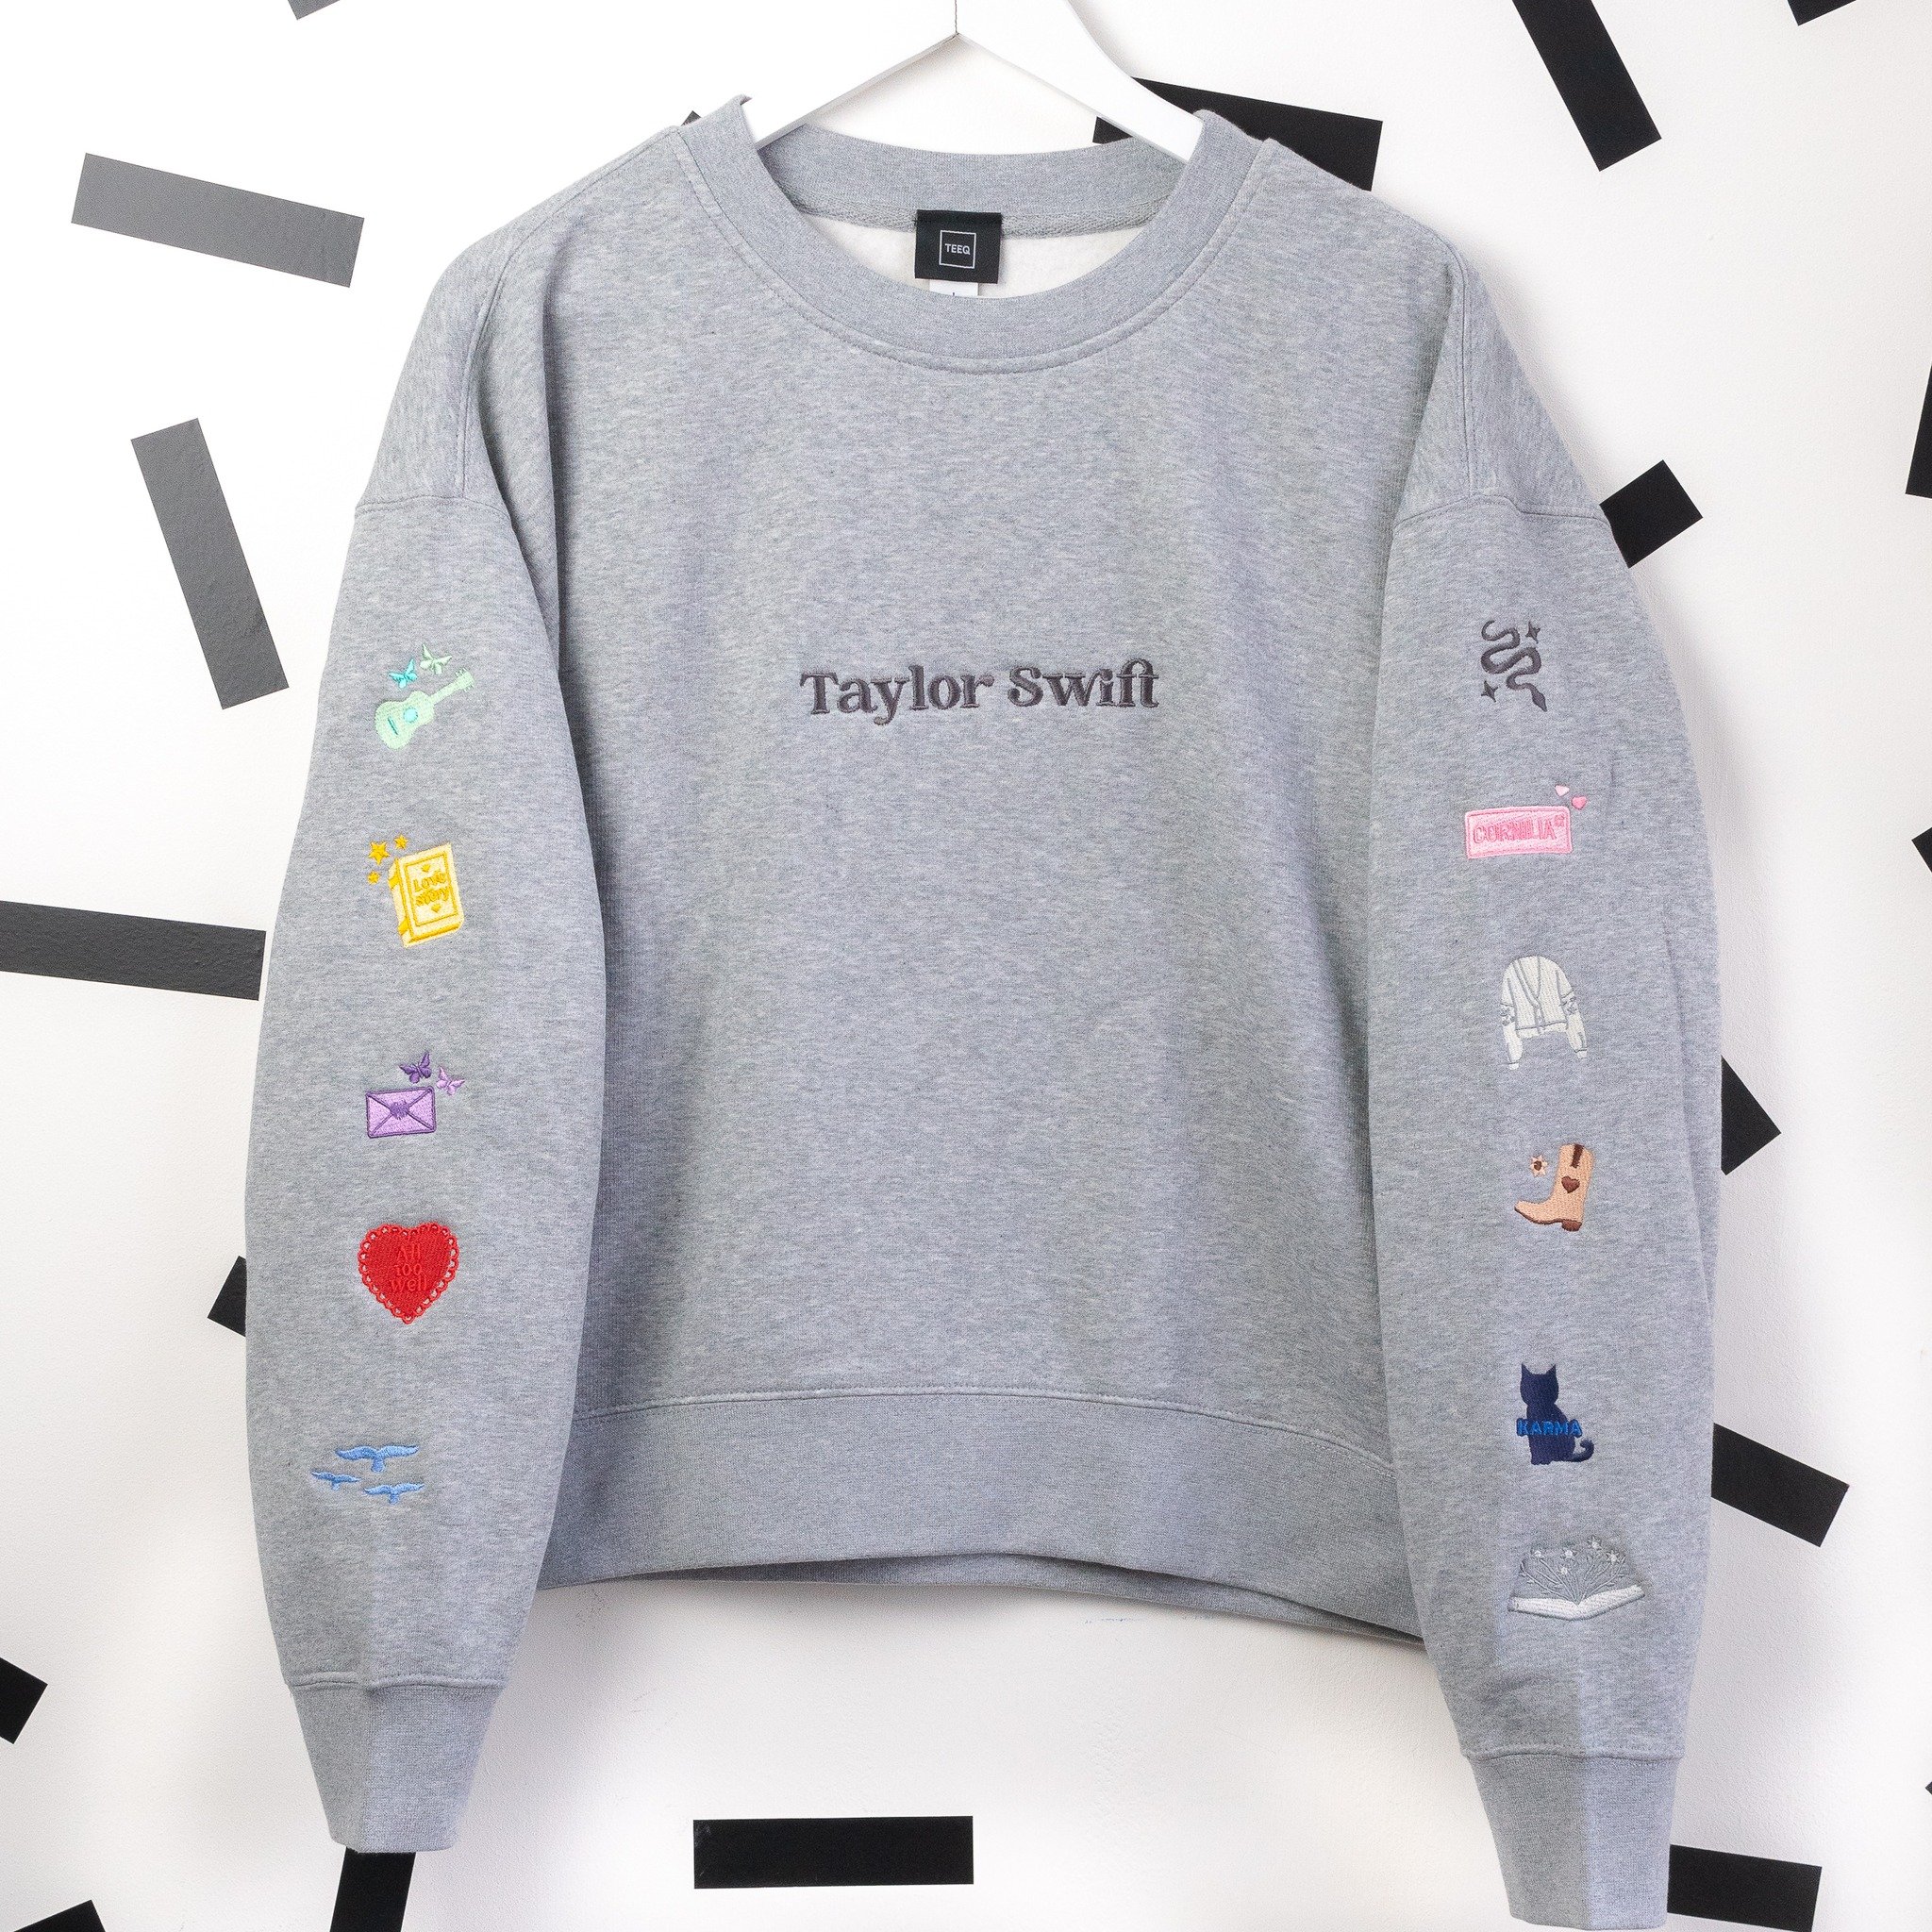 Now who&rsquo;s going to a TS Europe tour date and WHICH ONE? ✨

(I&rsquo;m going to Stockholm 19th) 😭

P.S Our new Taylor Swift era's jumper, is a celebration of all 11 eras, including The Tortured Poets Department (TTPD), for fans to cherish. This